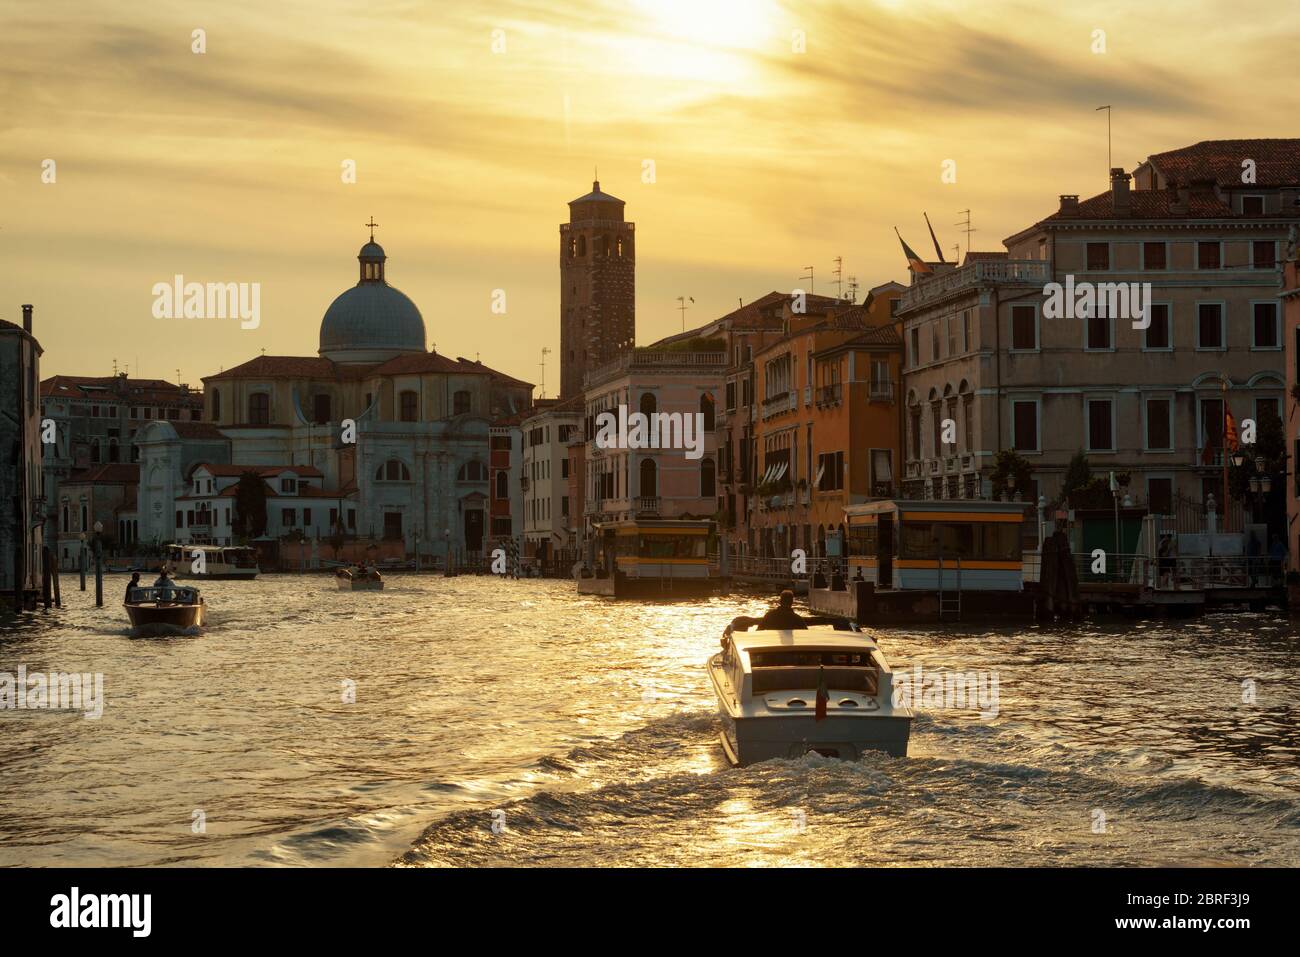 Water taxis are sailing along the Grand Canal at sunset in Venice, Italy. Grand Canal is one of the major water-traffic corridors in Venice. Stock Photo